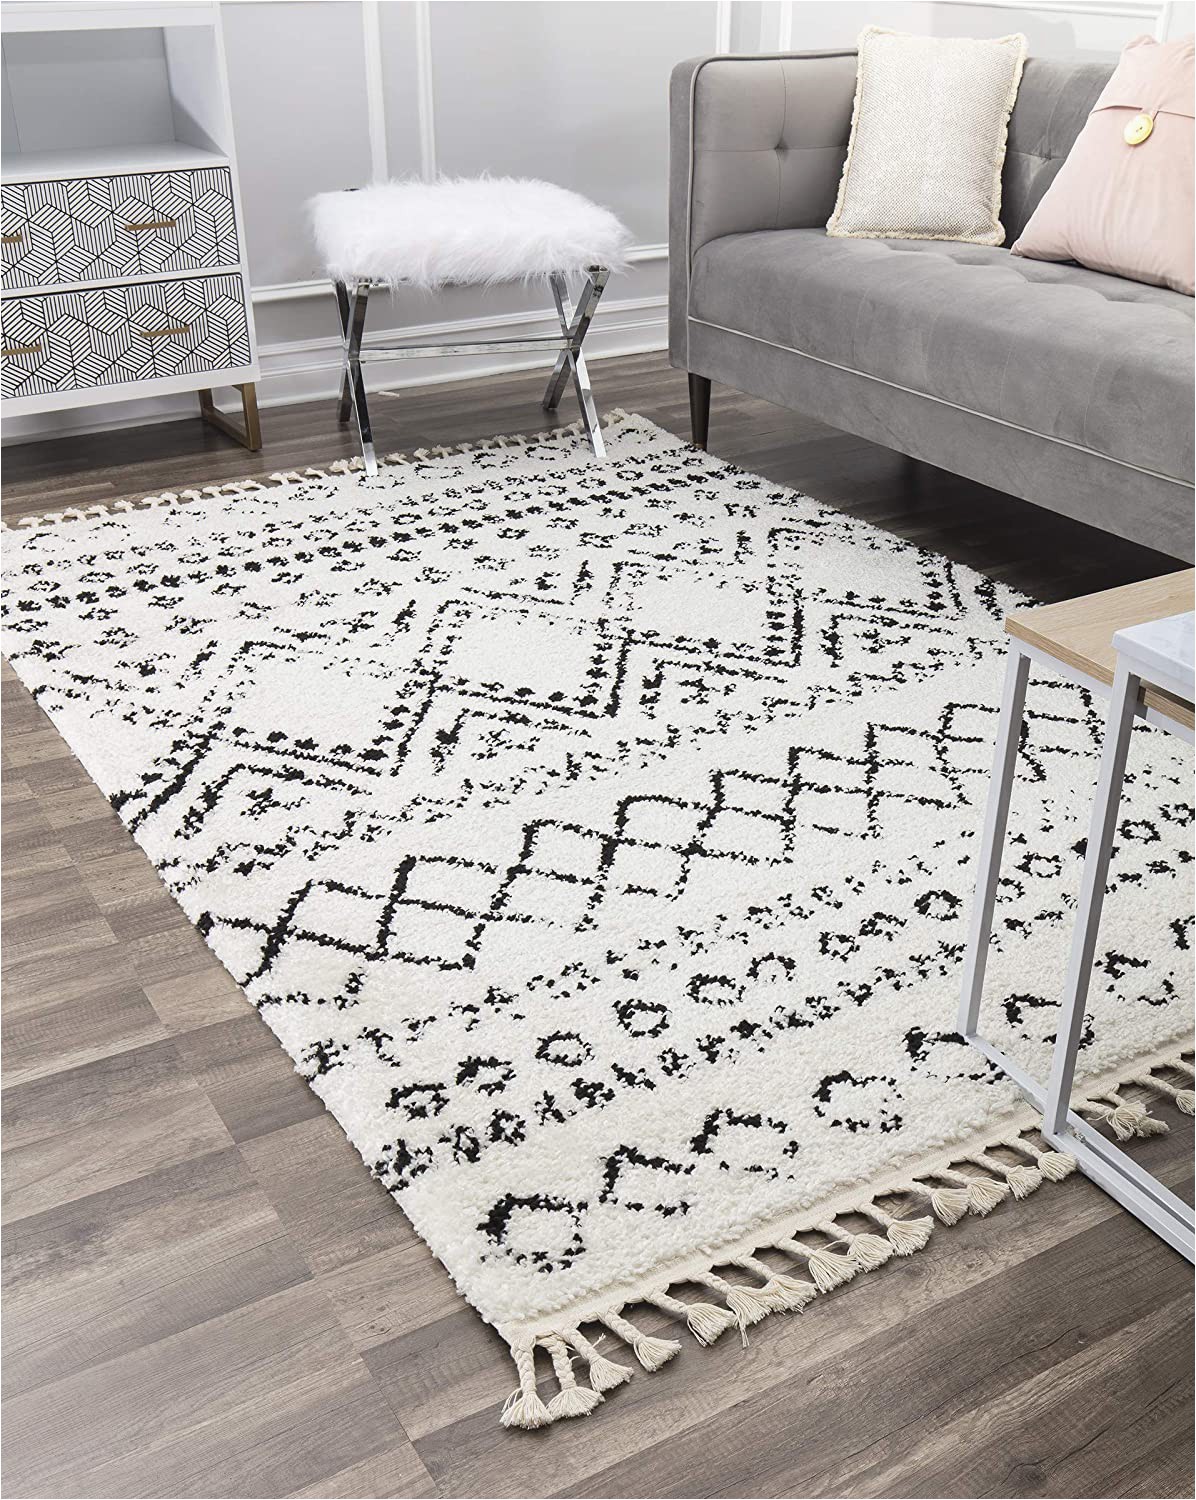 Grey and White Striped area Rug Amazon Cosmoliving by Cosmopolitan Wisp area Rug 8 0